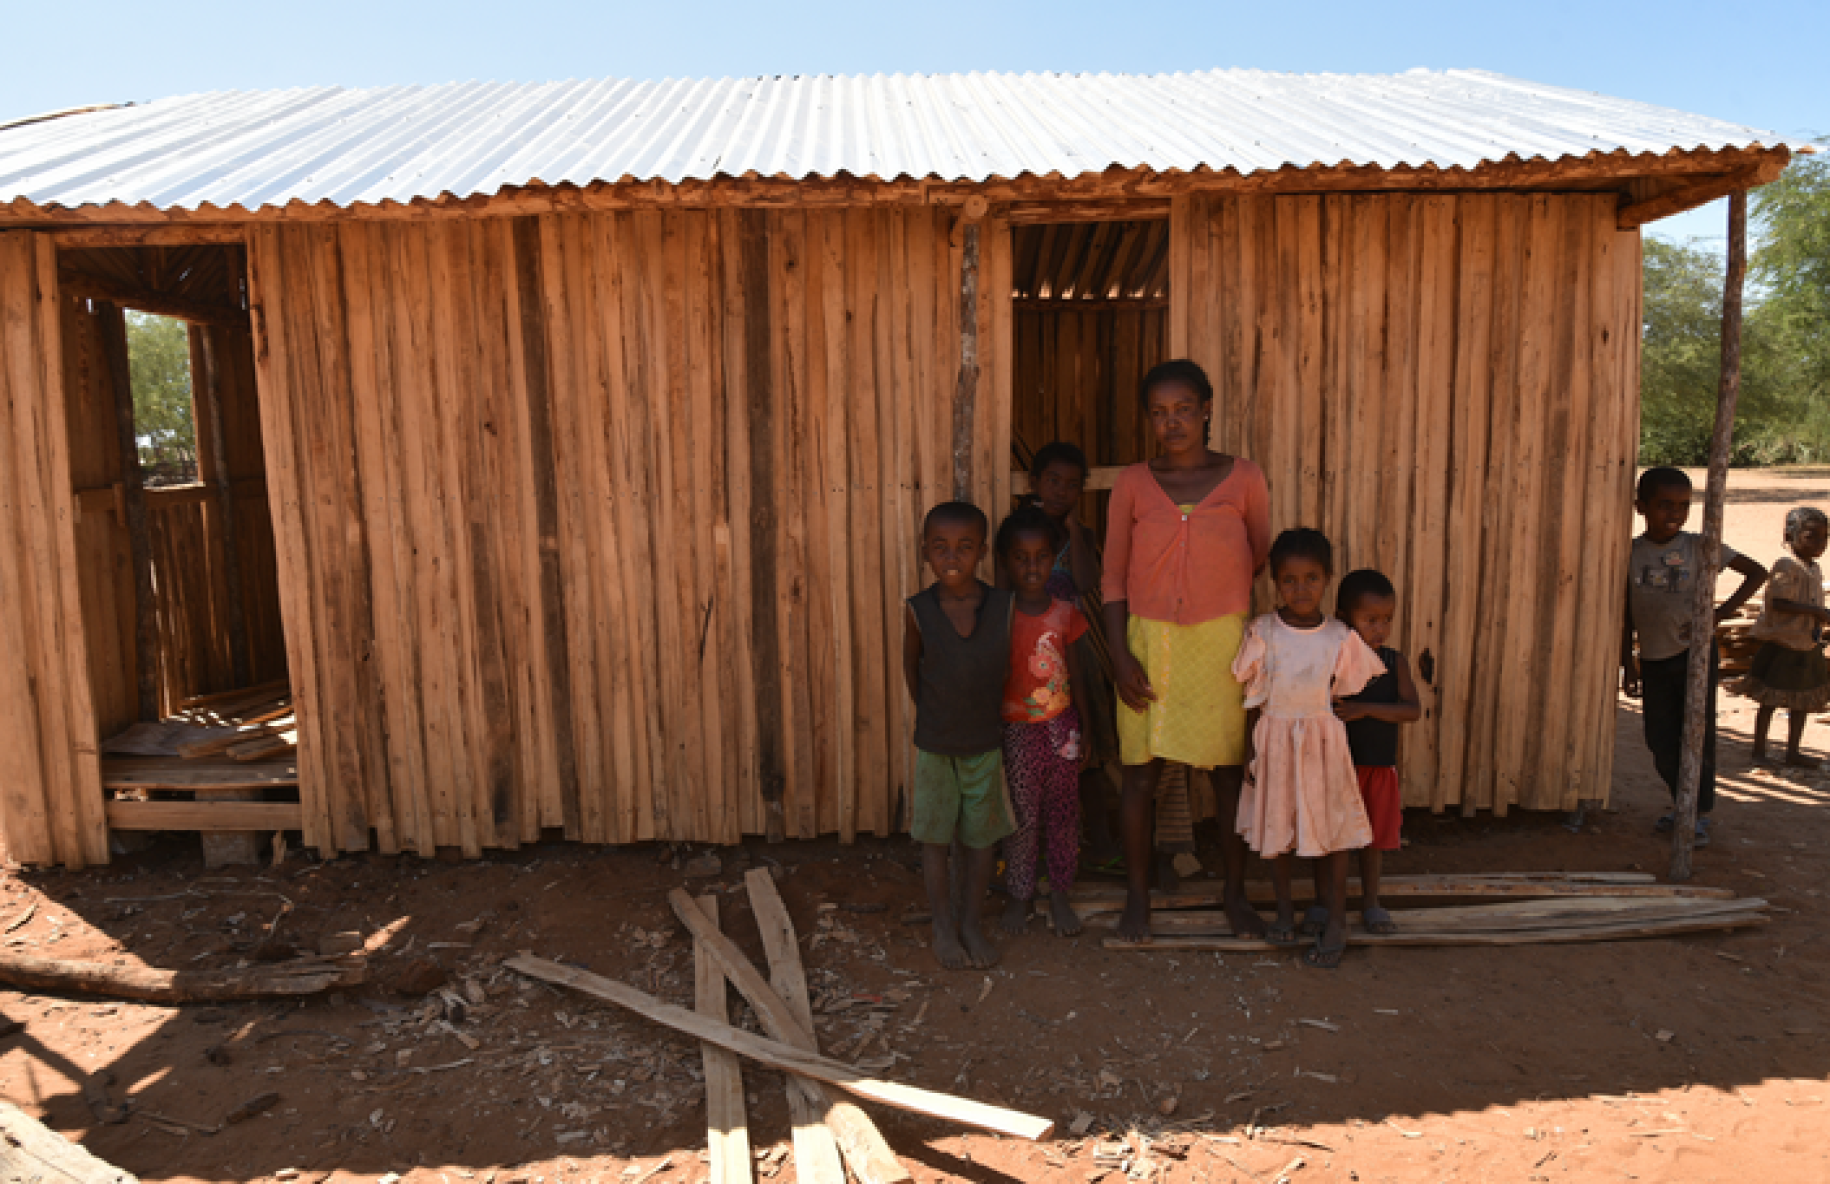 A Malagasy woman stands before the camera, surrounded by young children, in front of a humble wooden house in the village of Amhamahavel, Madagascar.